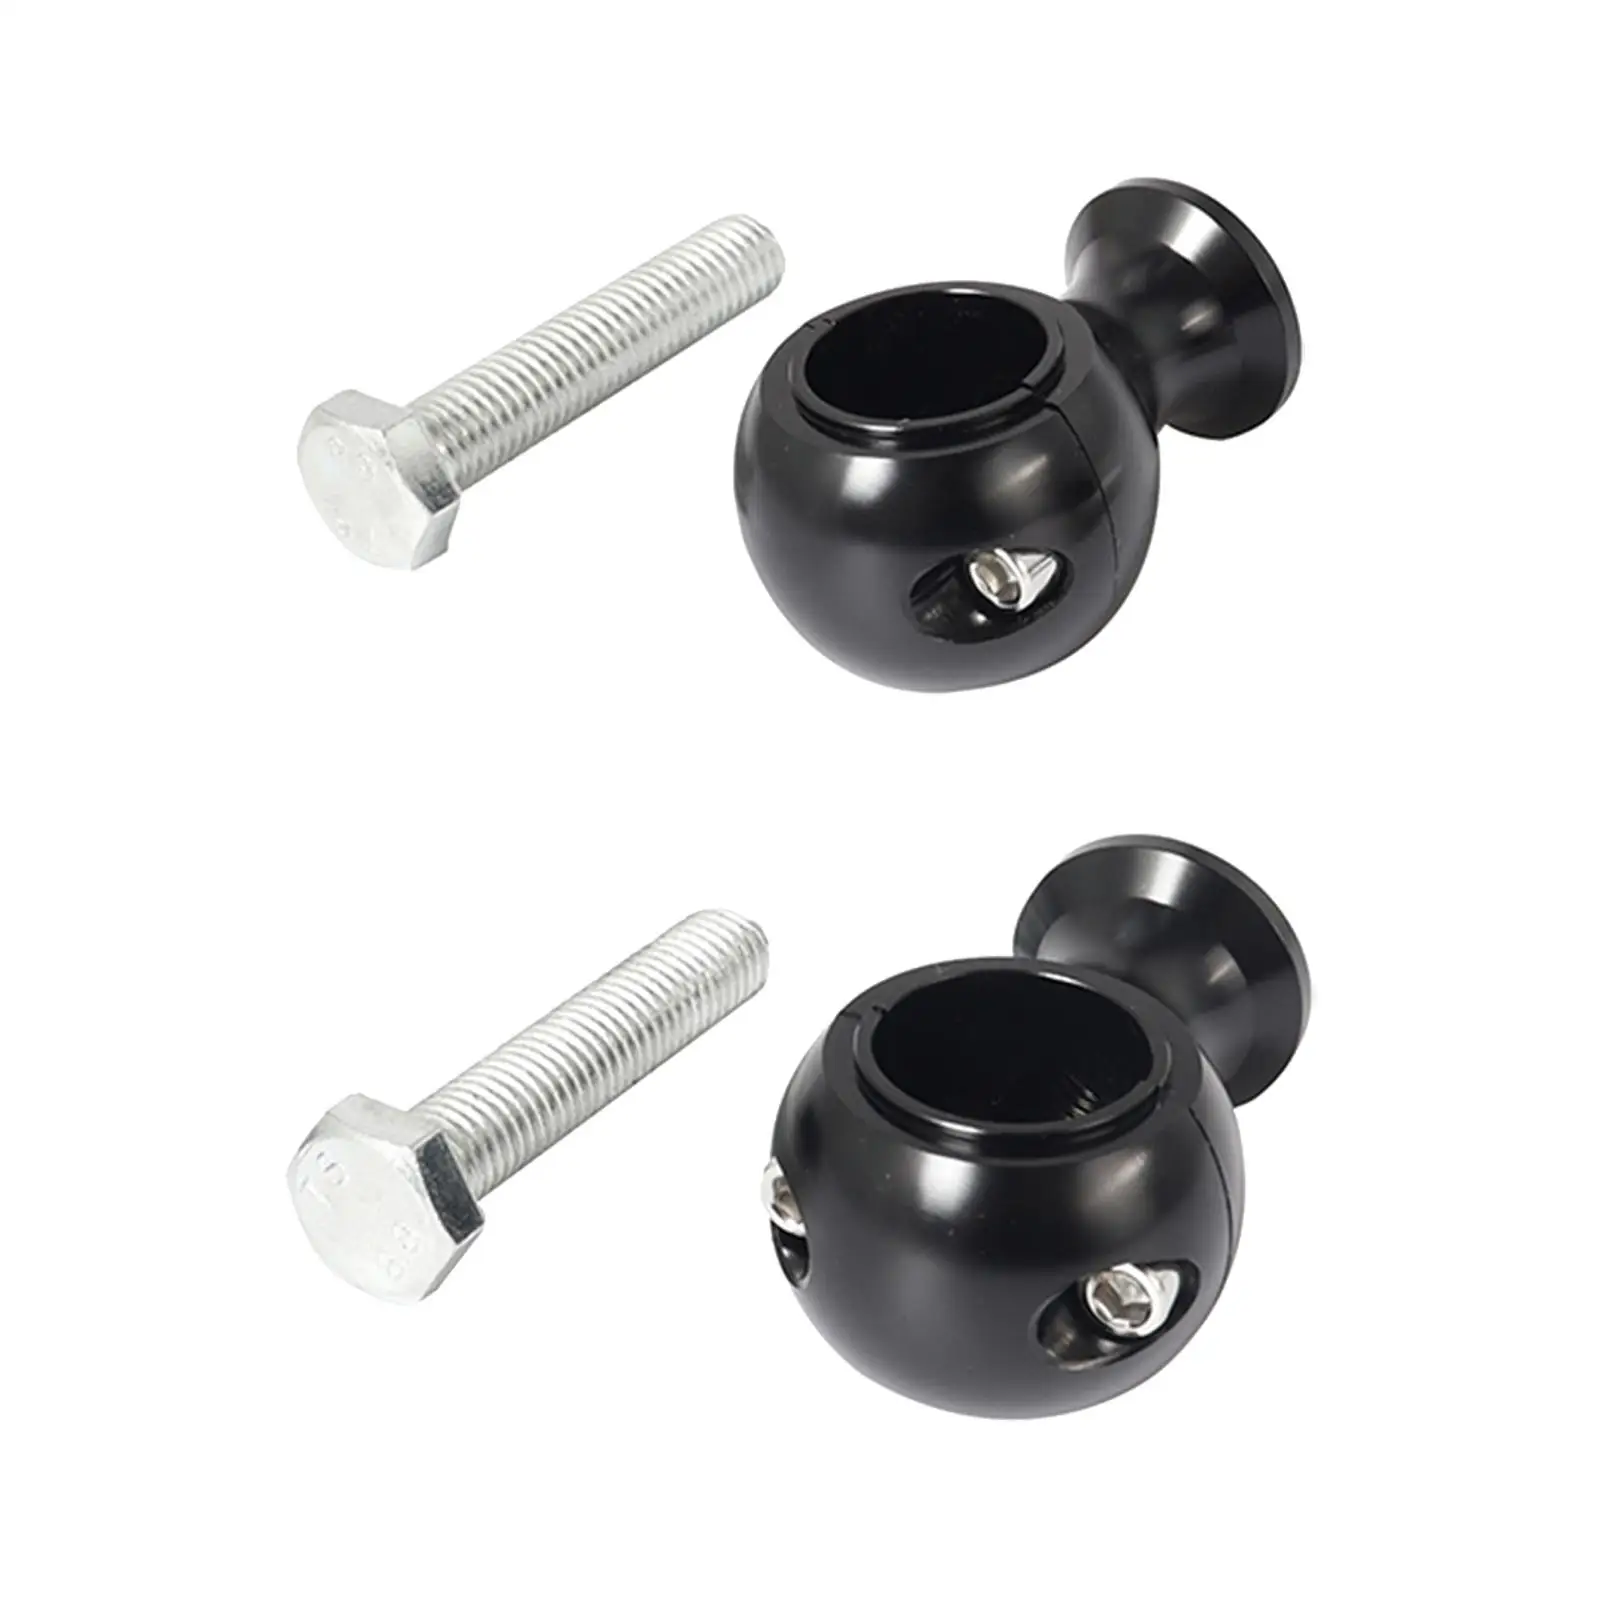 Motorcycle Handlebar Risers 22mm Round Accessories for